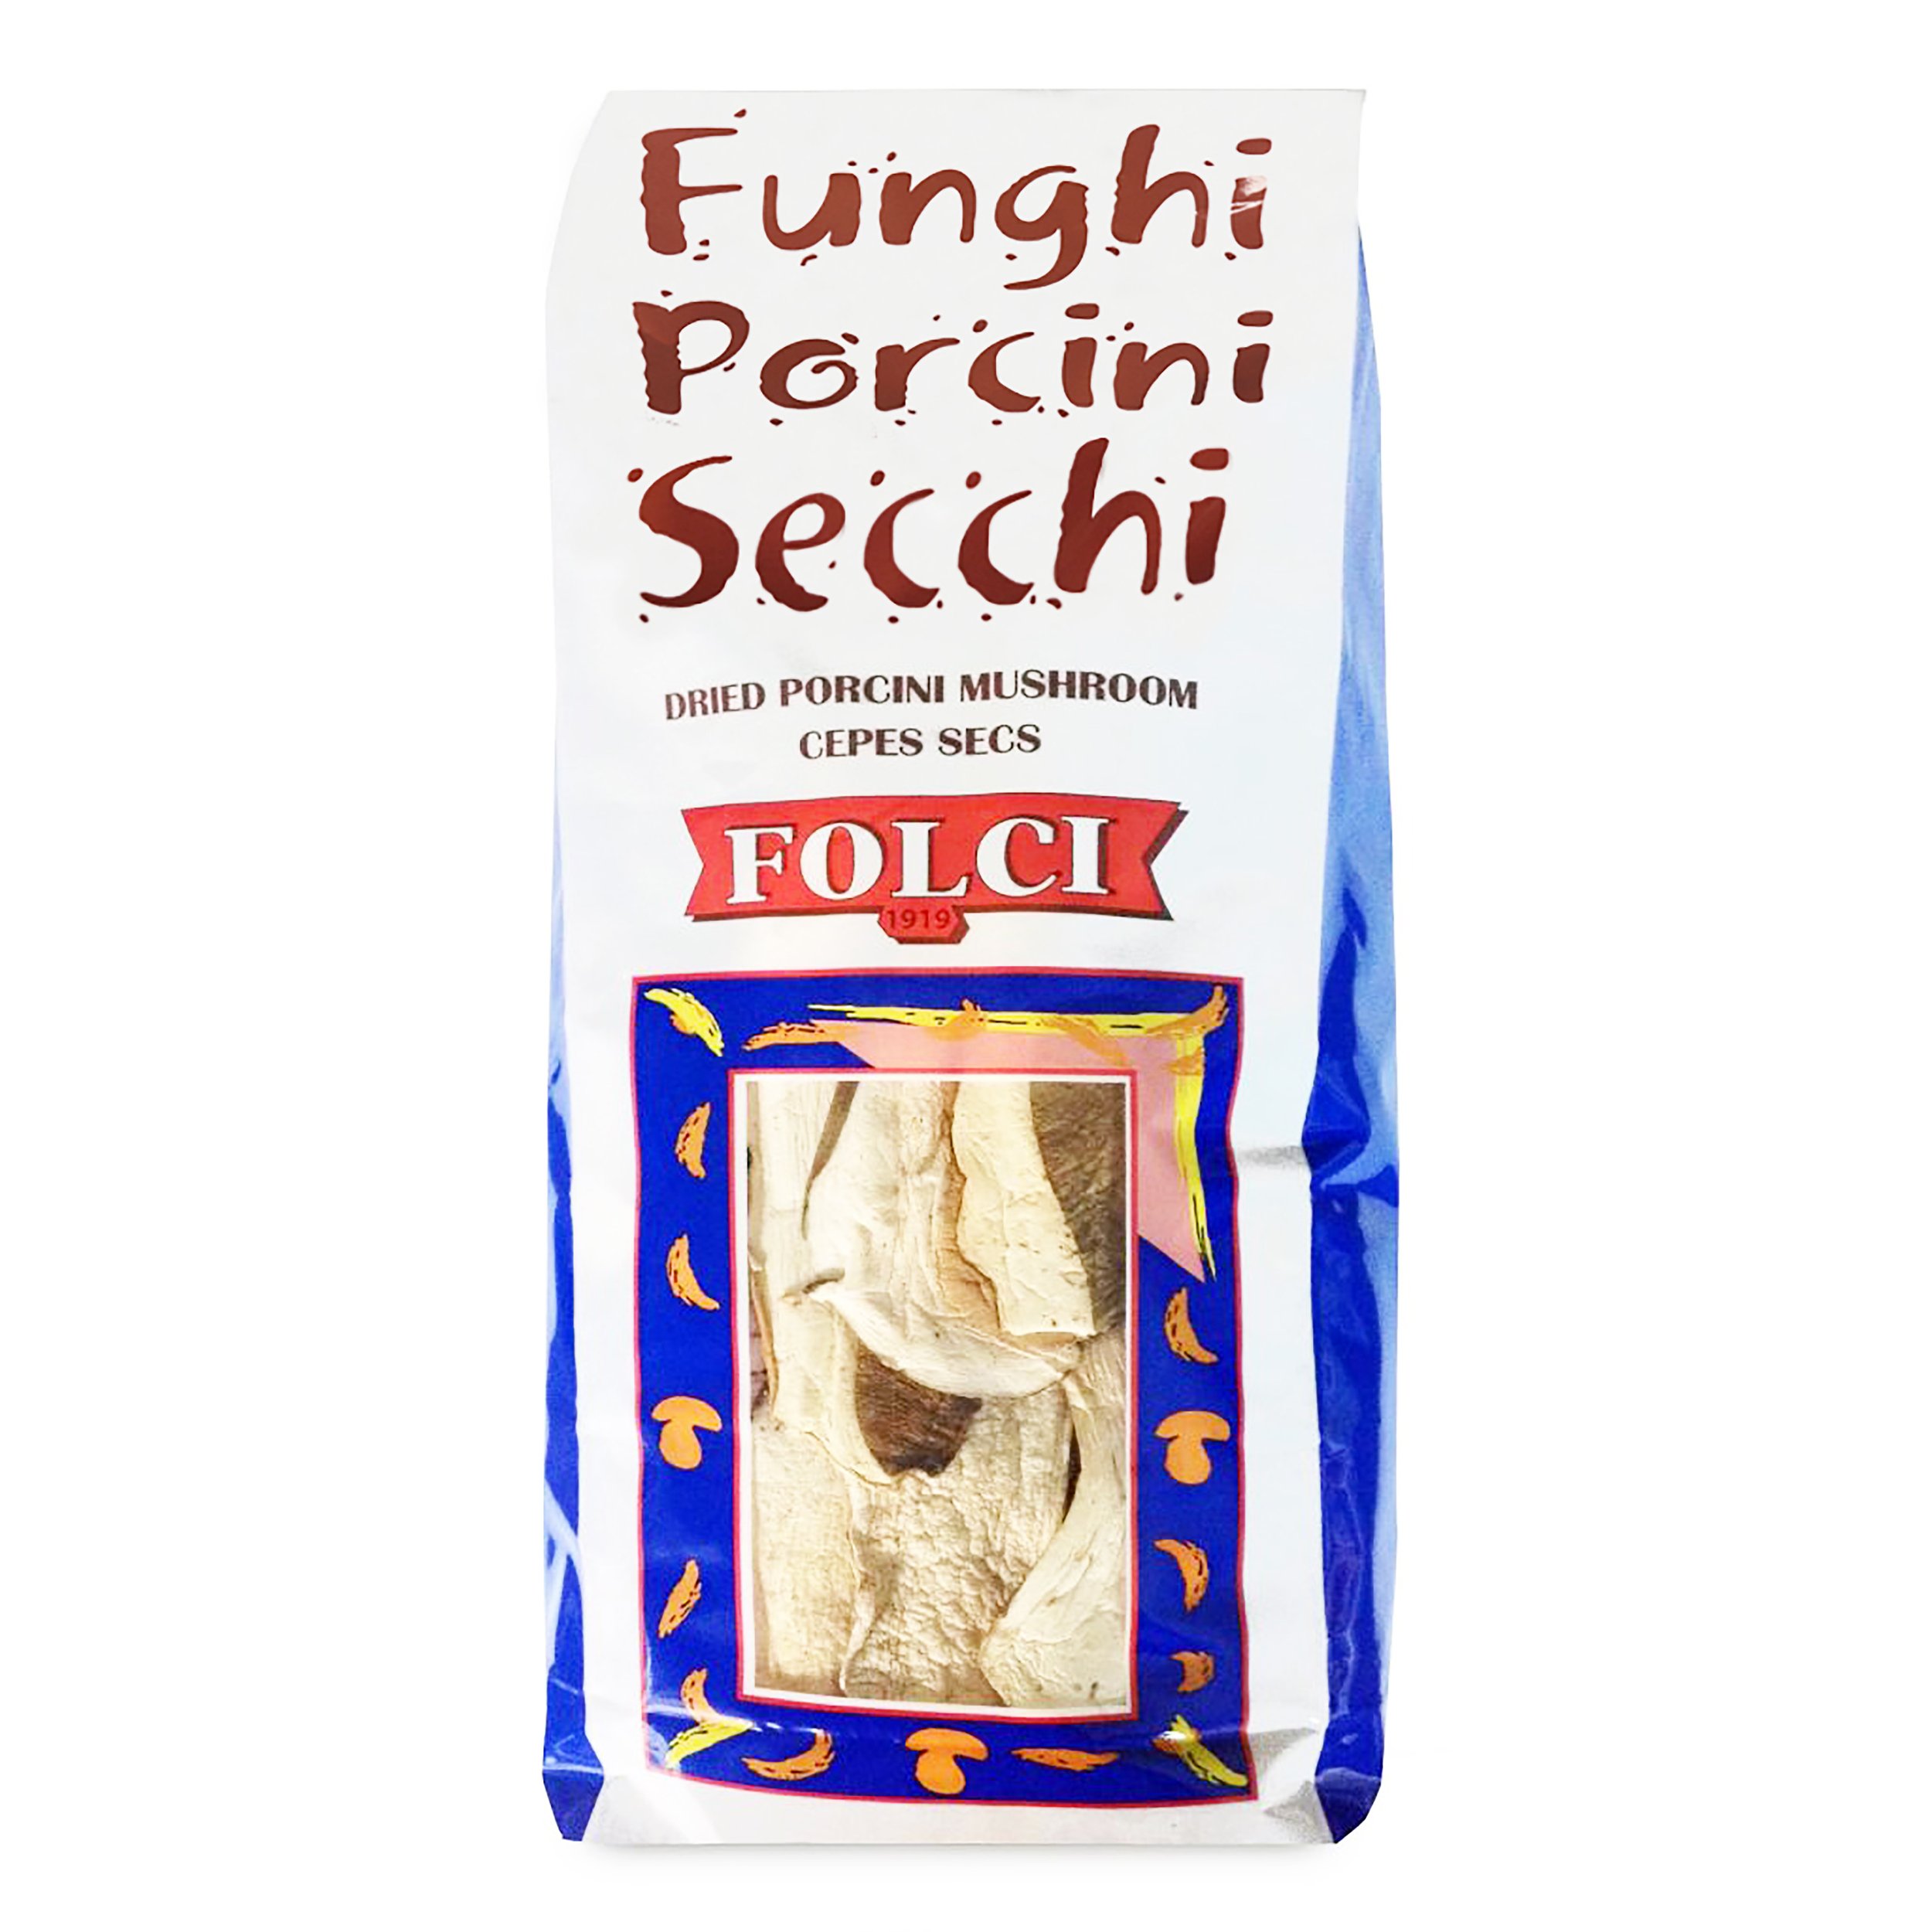 Folci products - dried porcini - 455g product shot.jpg